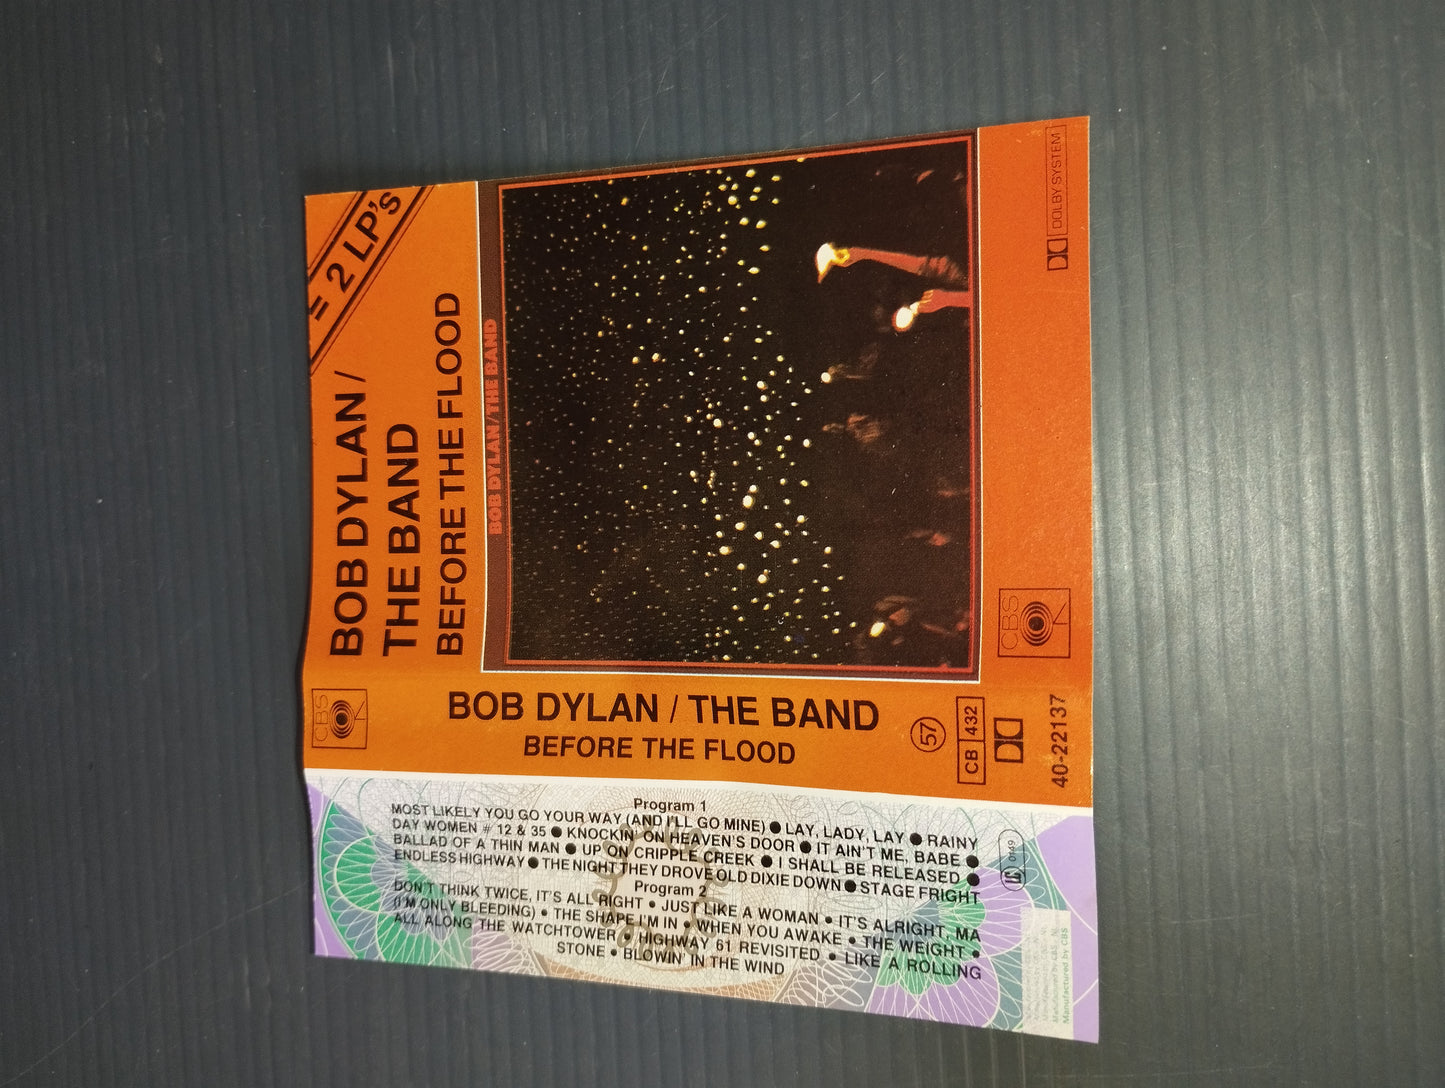 Before the flood" Bob Dylan/The Band Musicassette Published in 1974 by CBS Code .40-22137